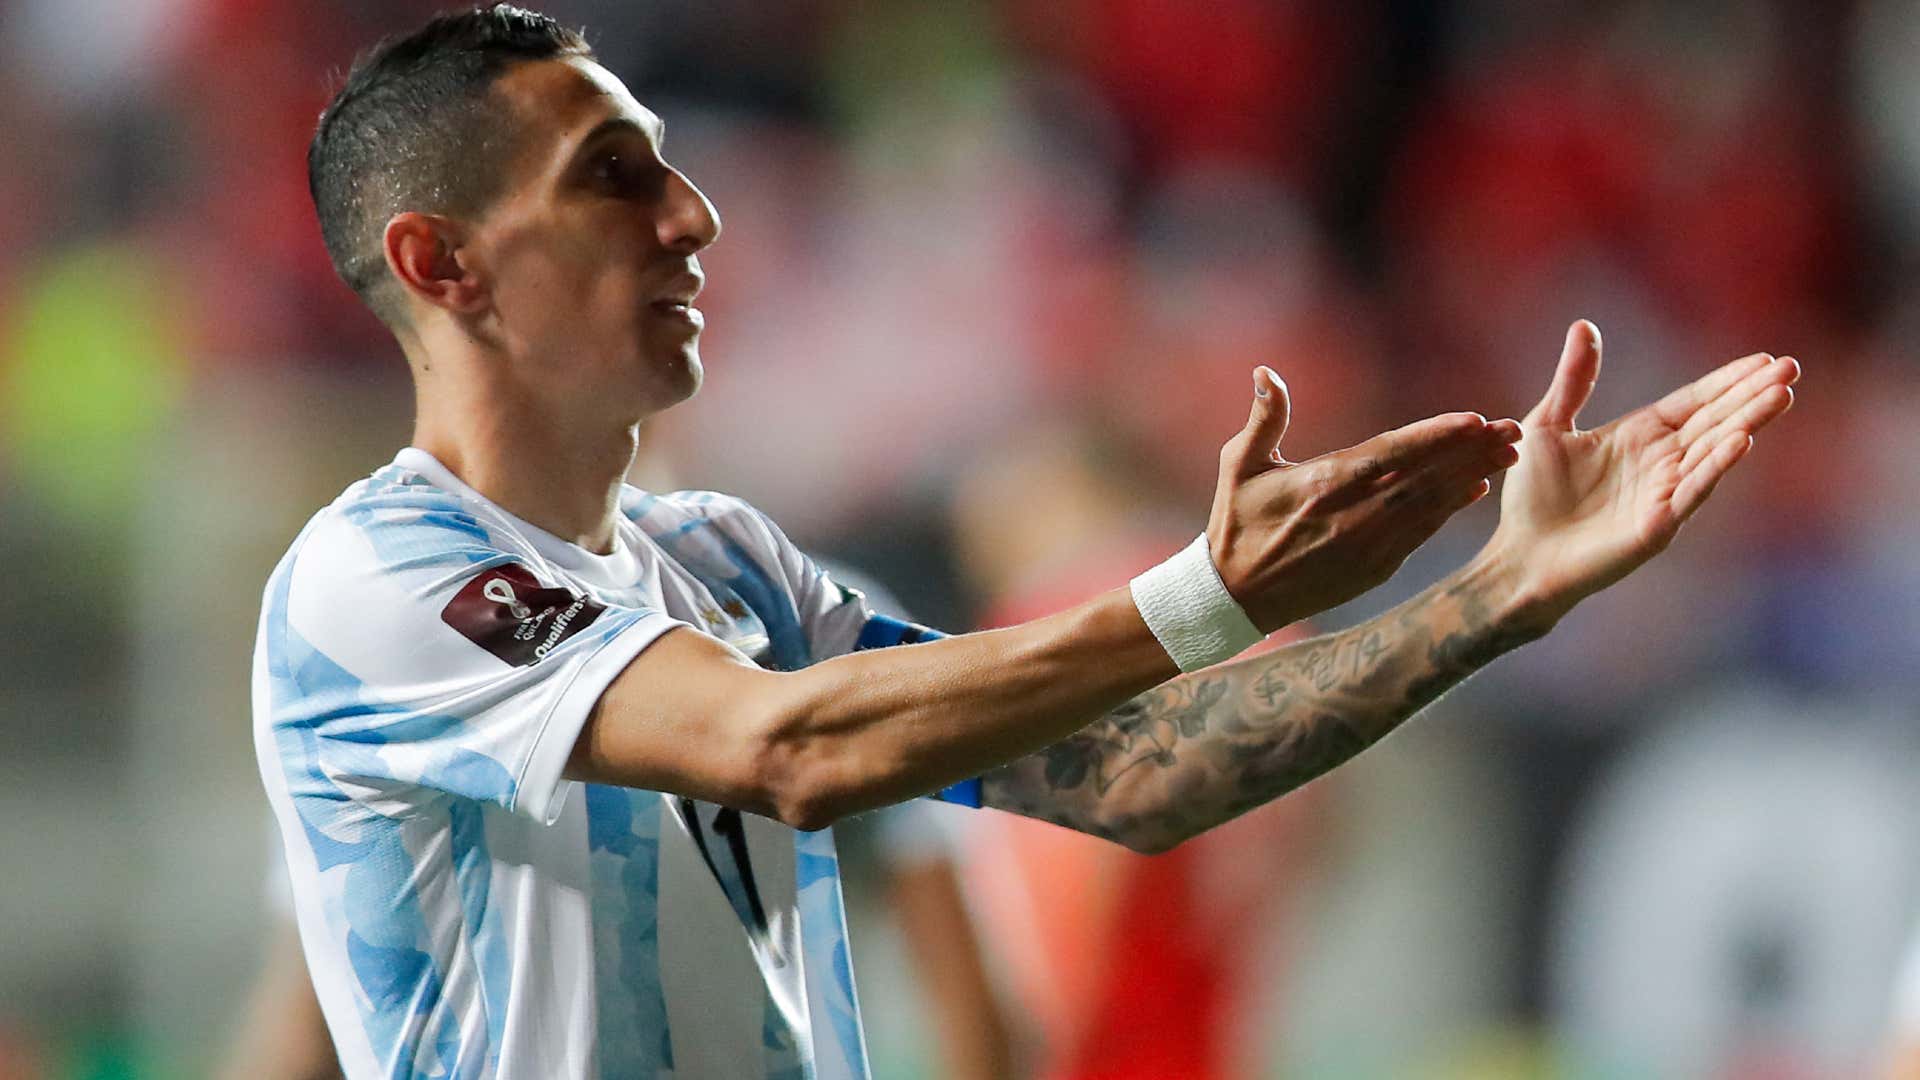 Watch: Di Maria scores wonder goal for Argentina against Chile in World Cup qualifying win | Goal.com